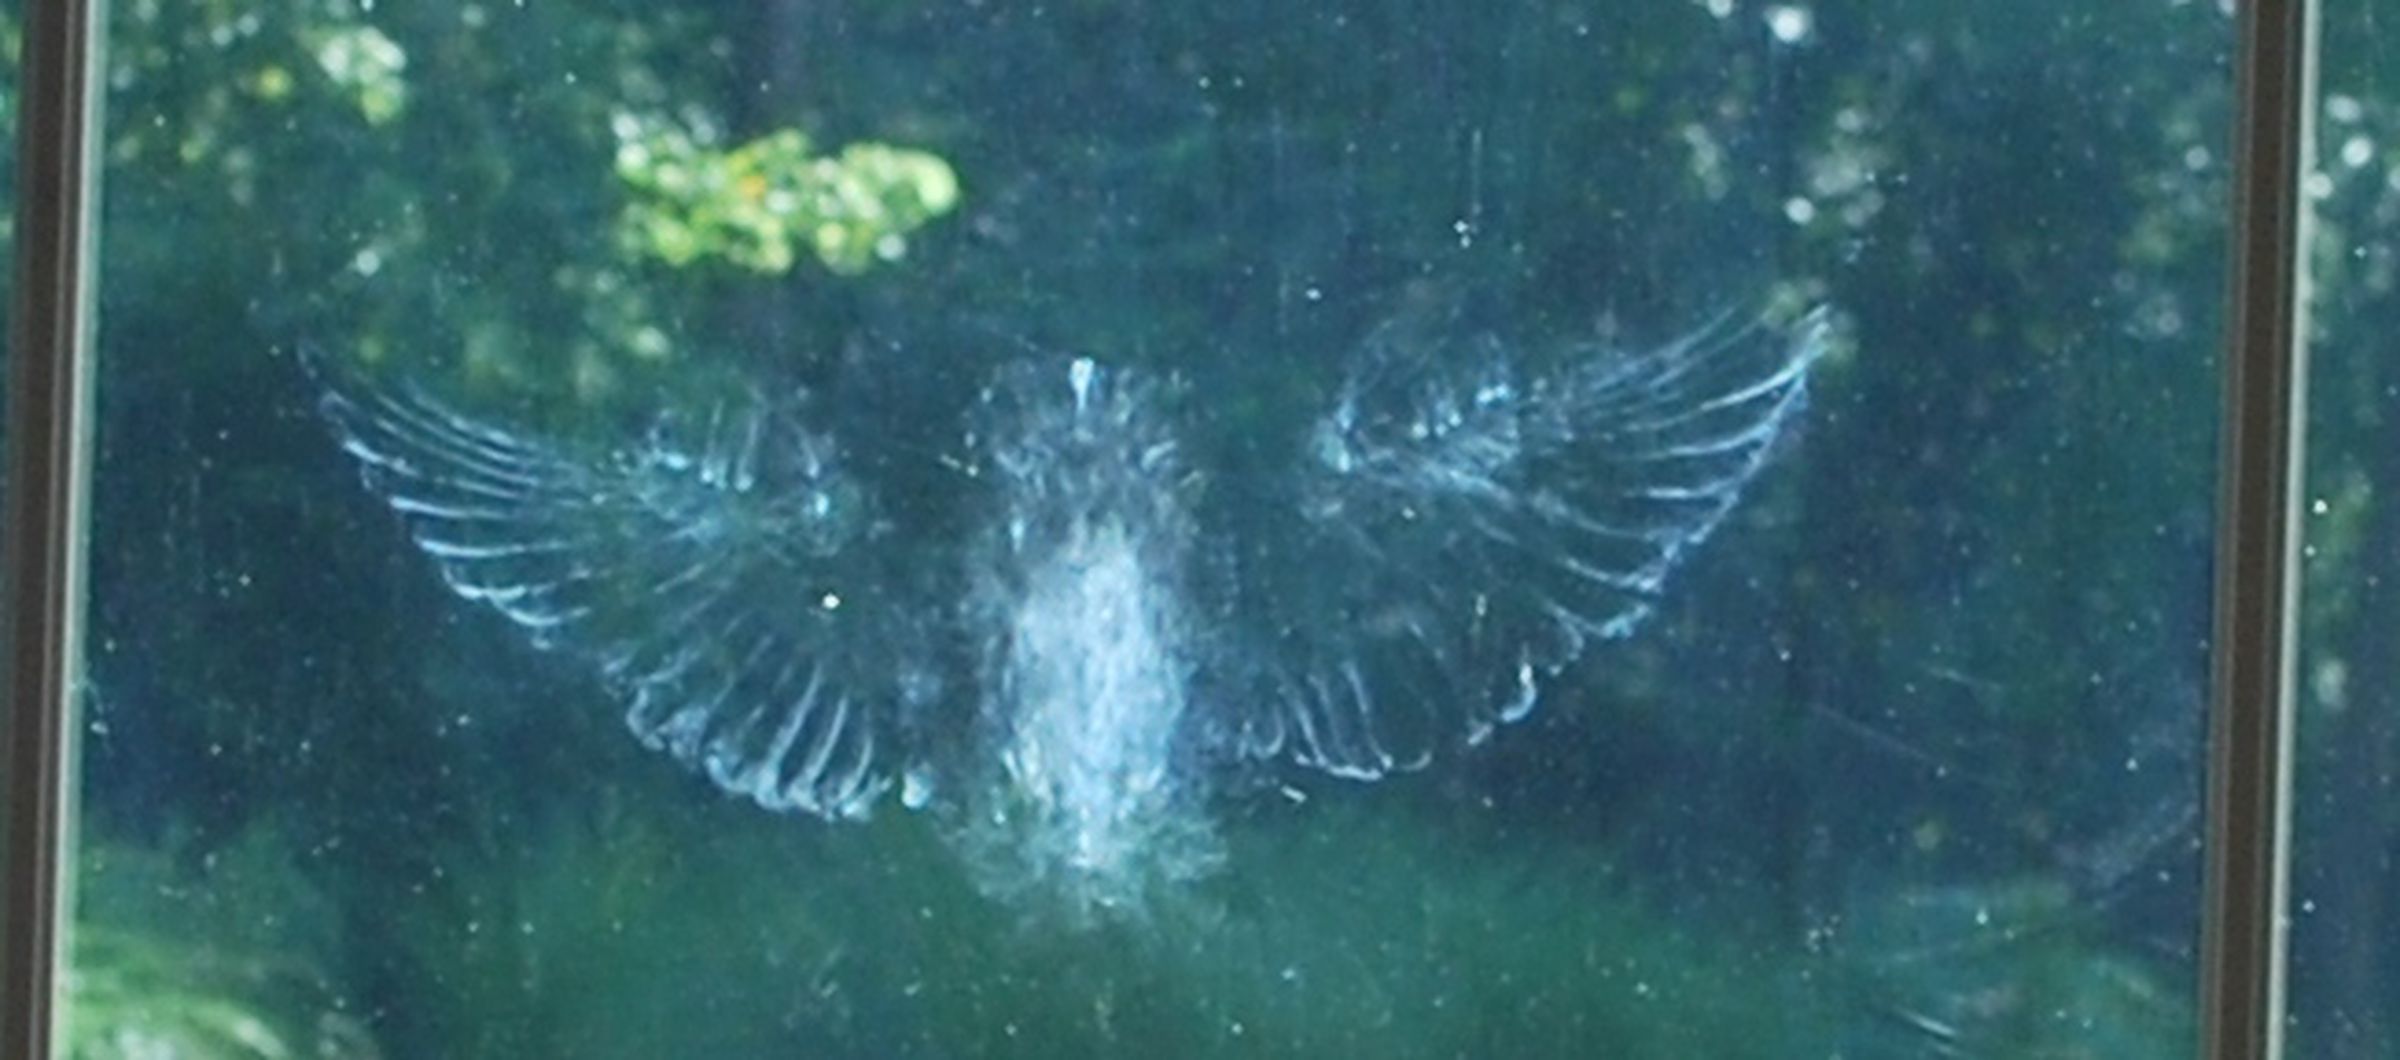 Bird dust left by a collision with the window.